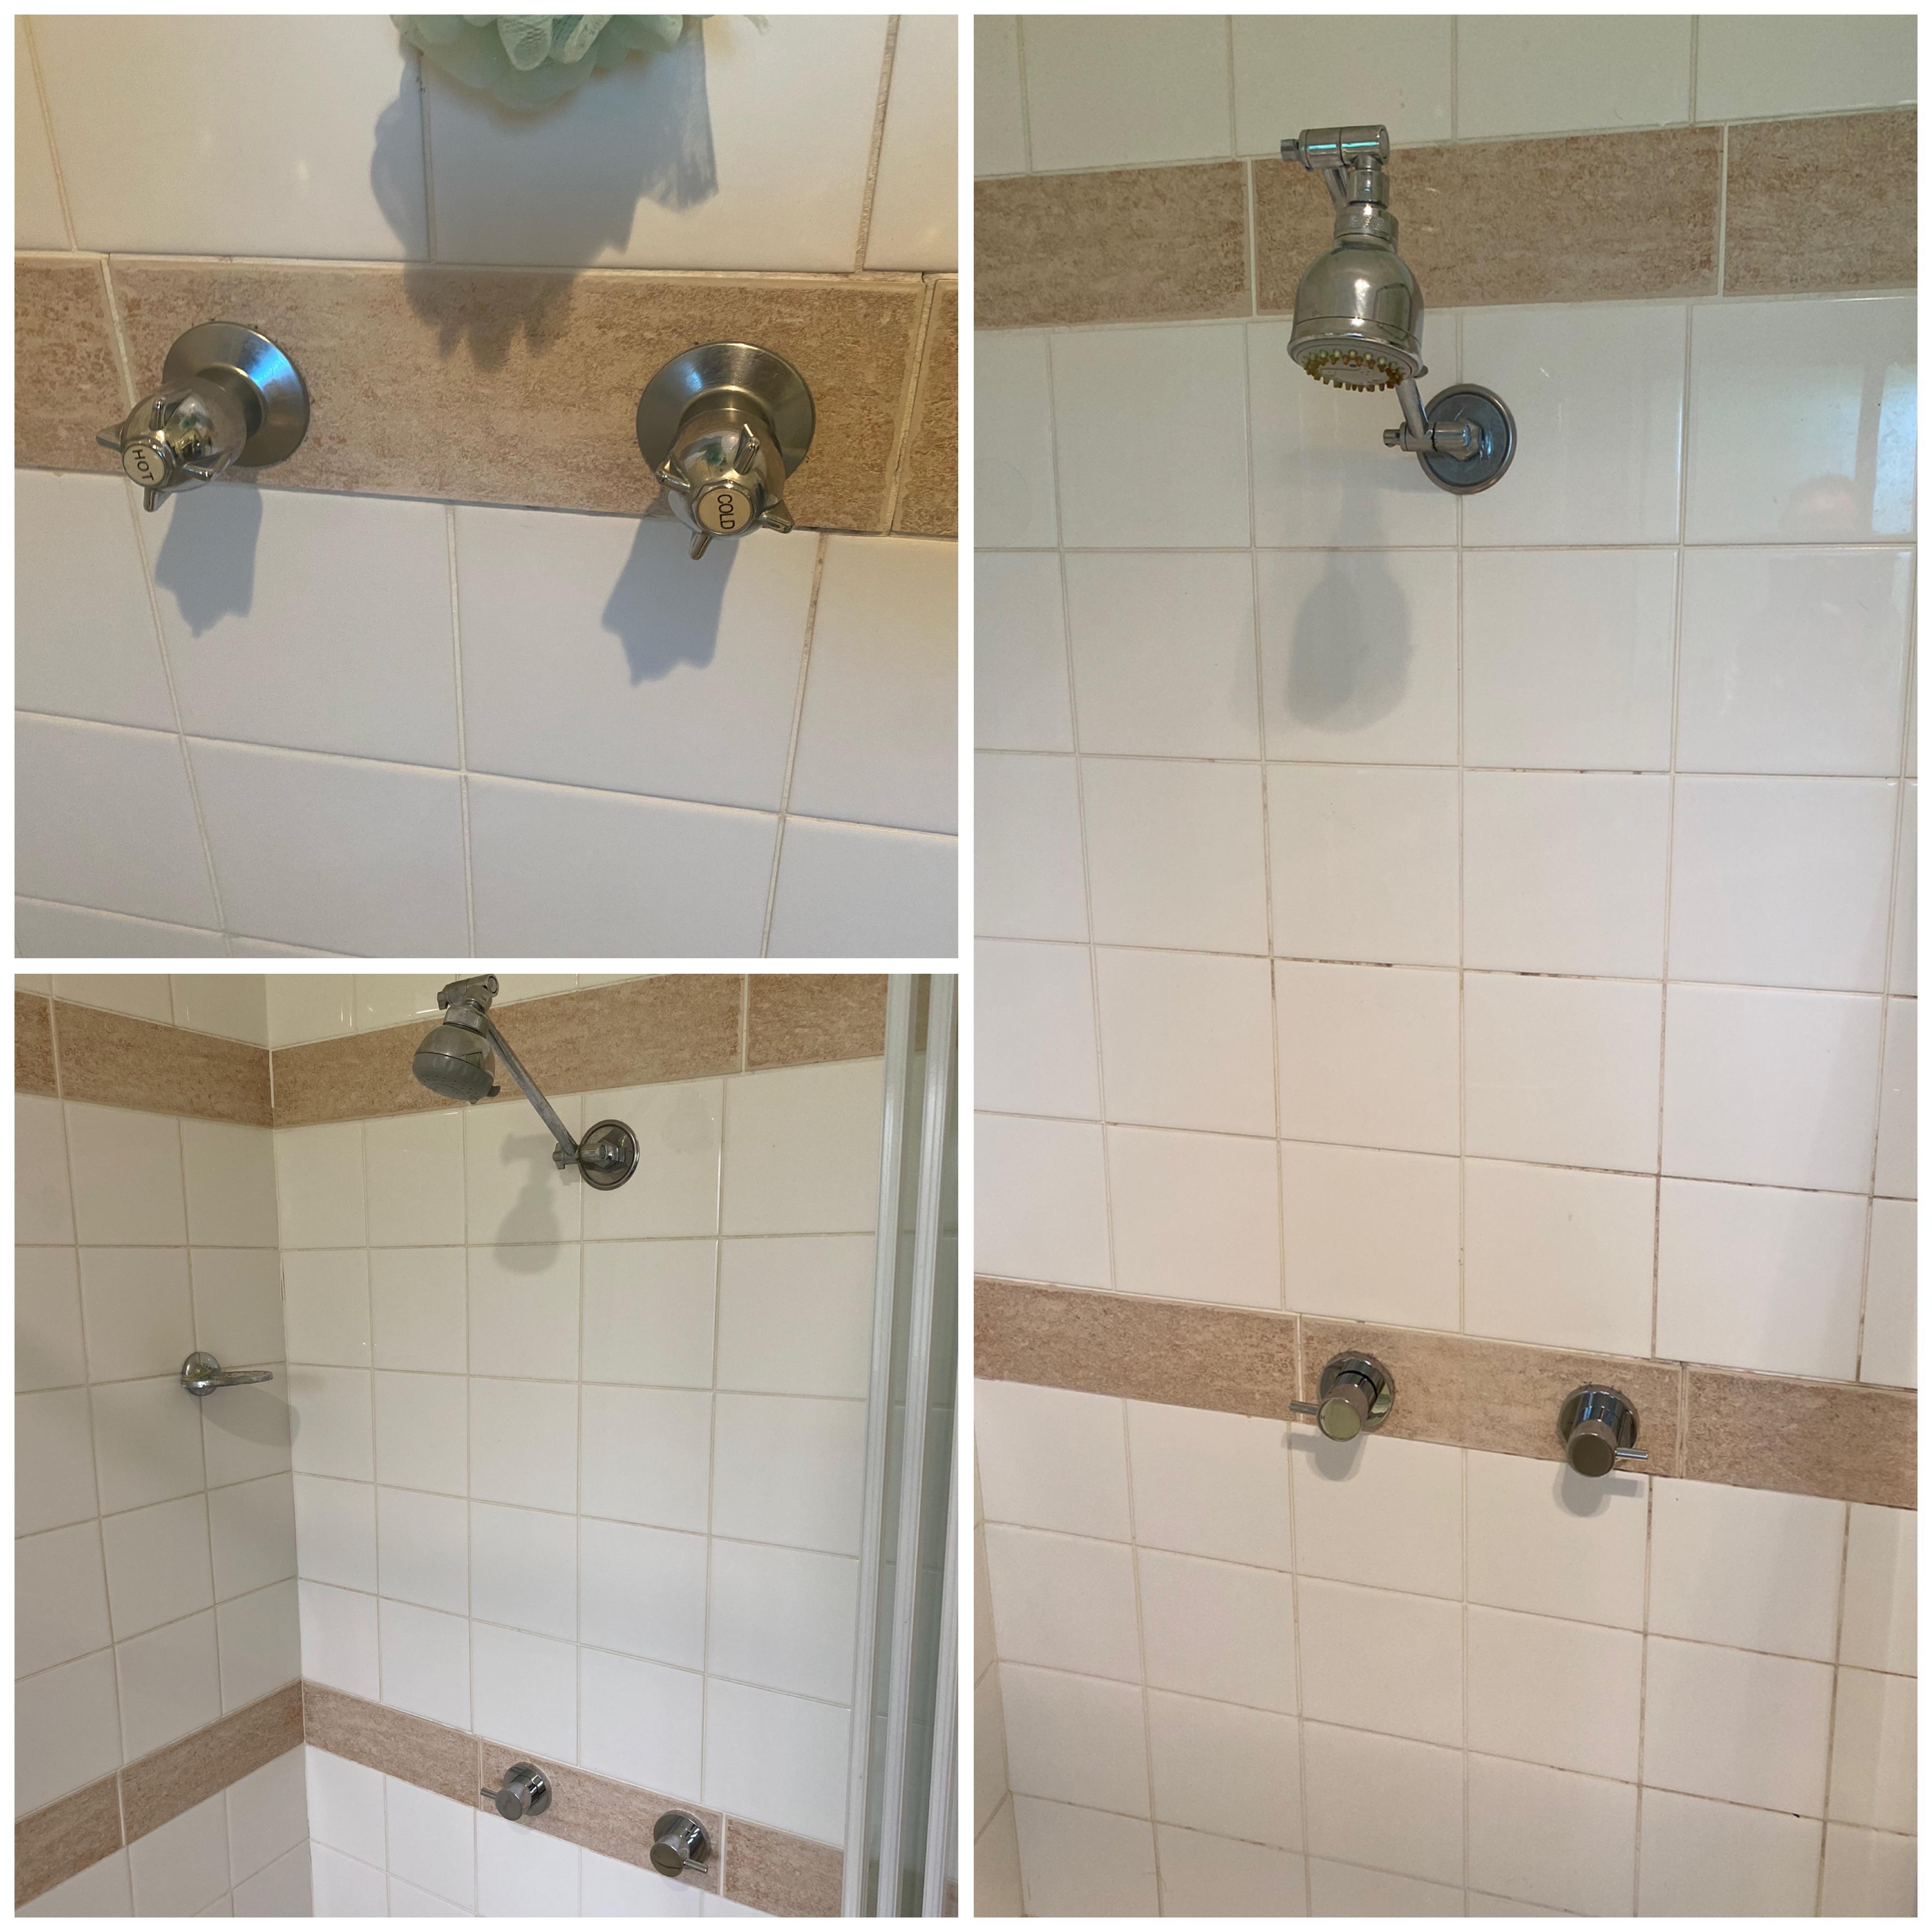 SHOWER TAPWARE REPLACEMENT CRUCIAL Plumbing Services Pty Ltd Seven Hills (02) 8041 4999